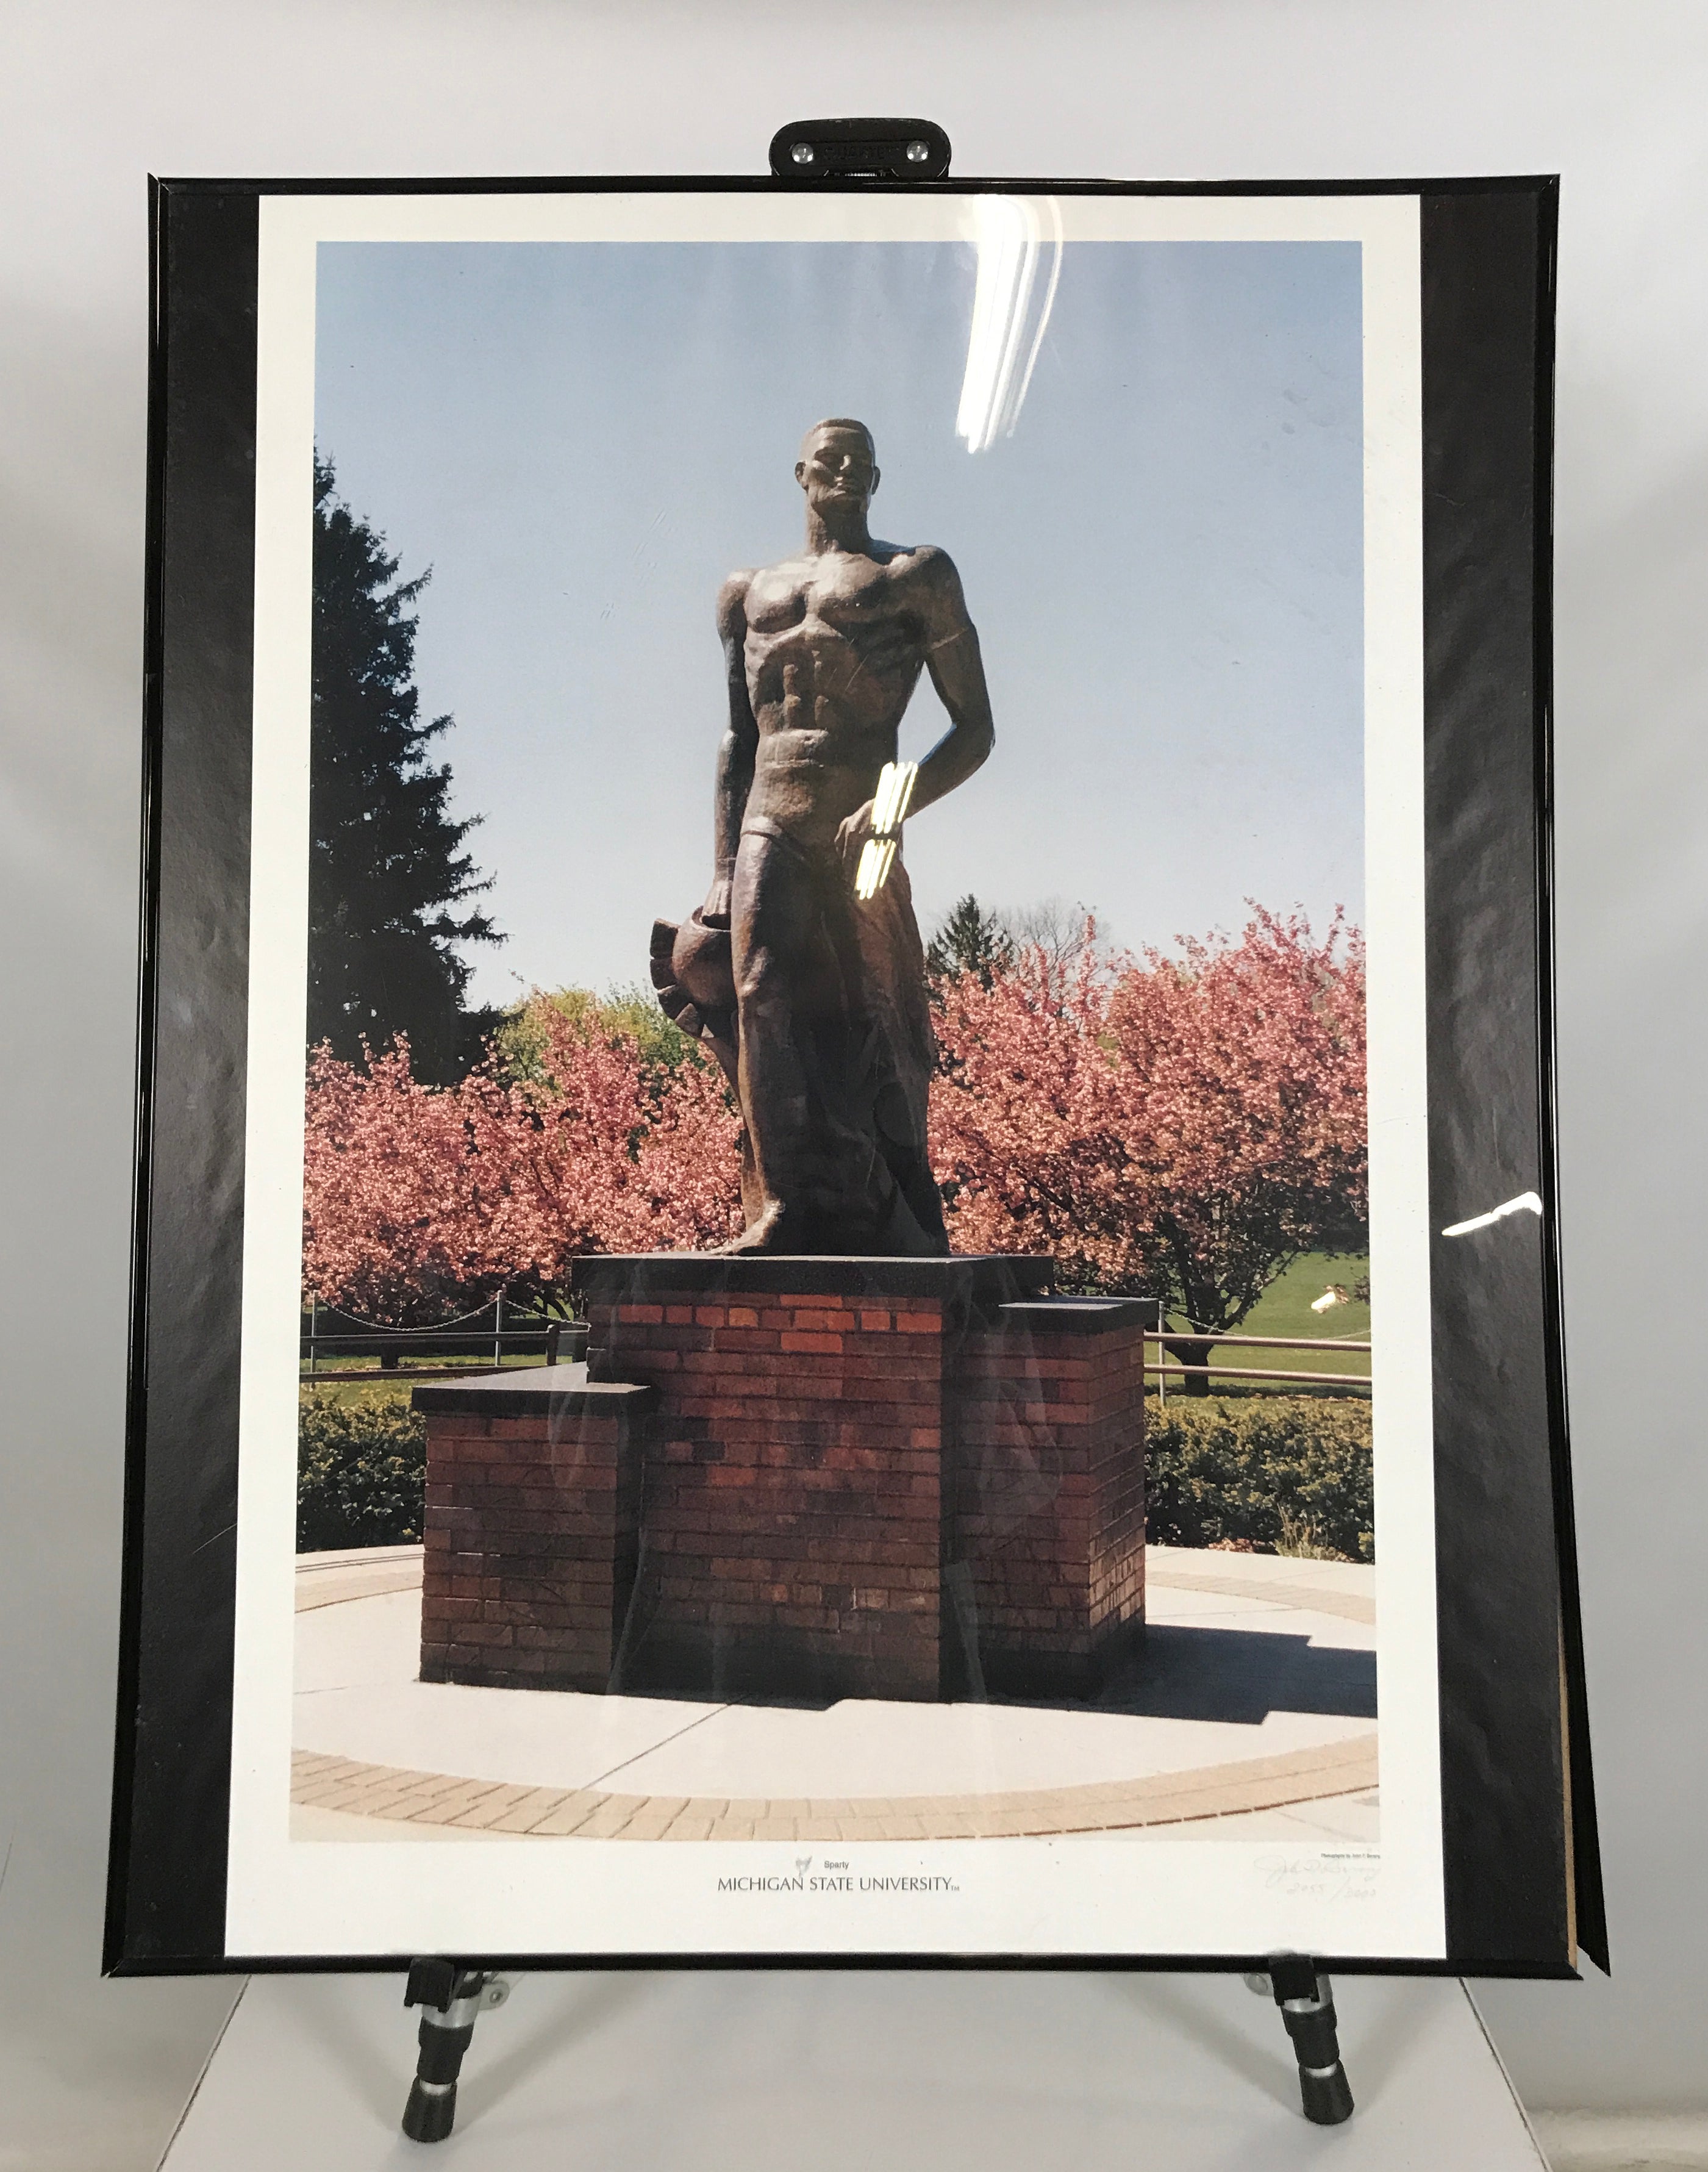 "Sparty Statue at Michigan State University" Framed Photograph